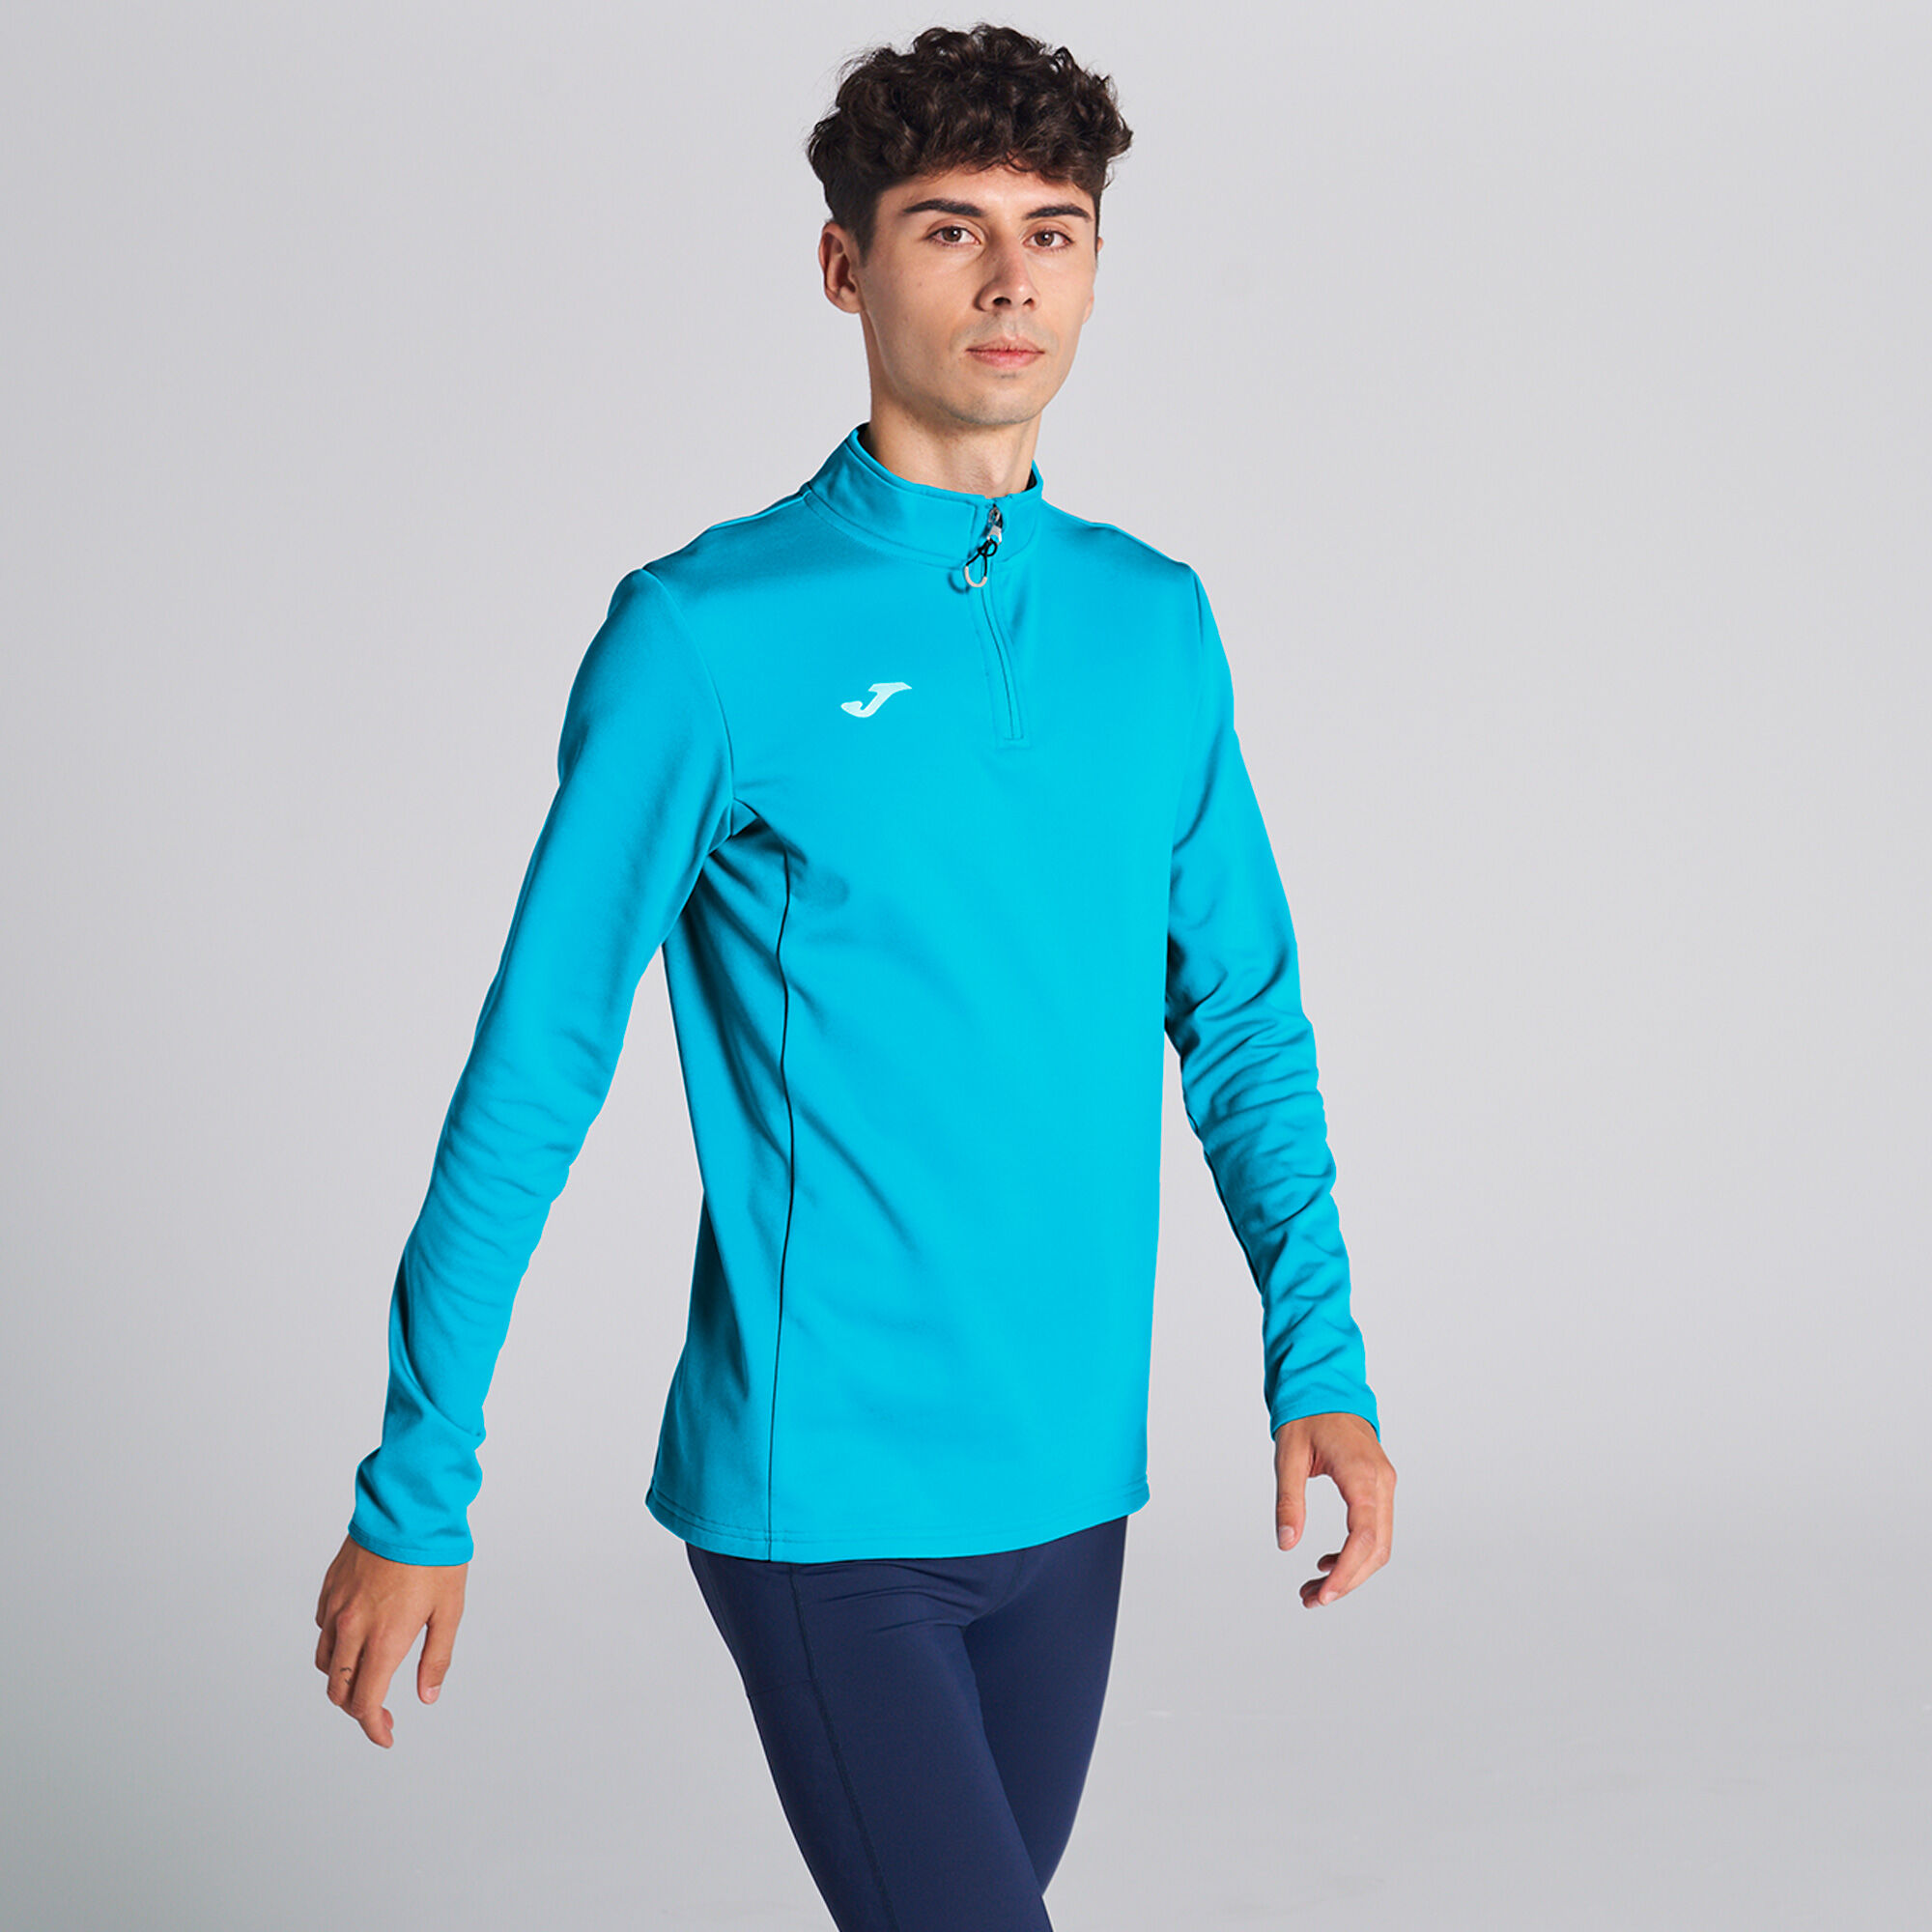 Sweat-shirt homme Running Night turquoise fluo